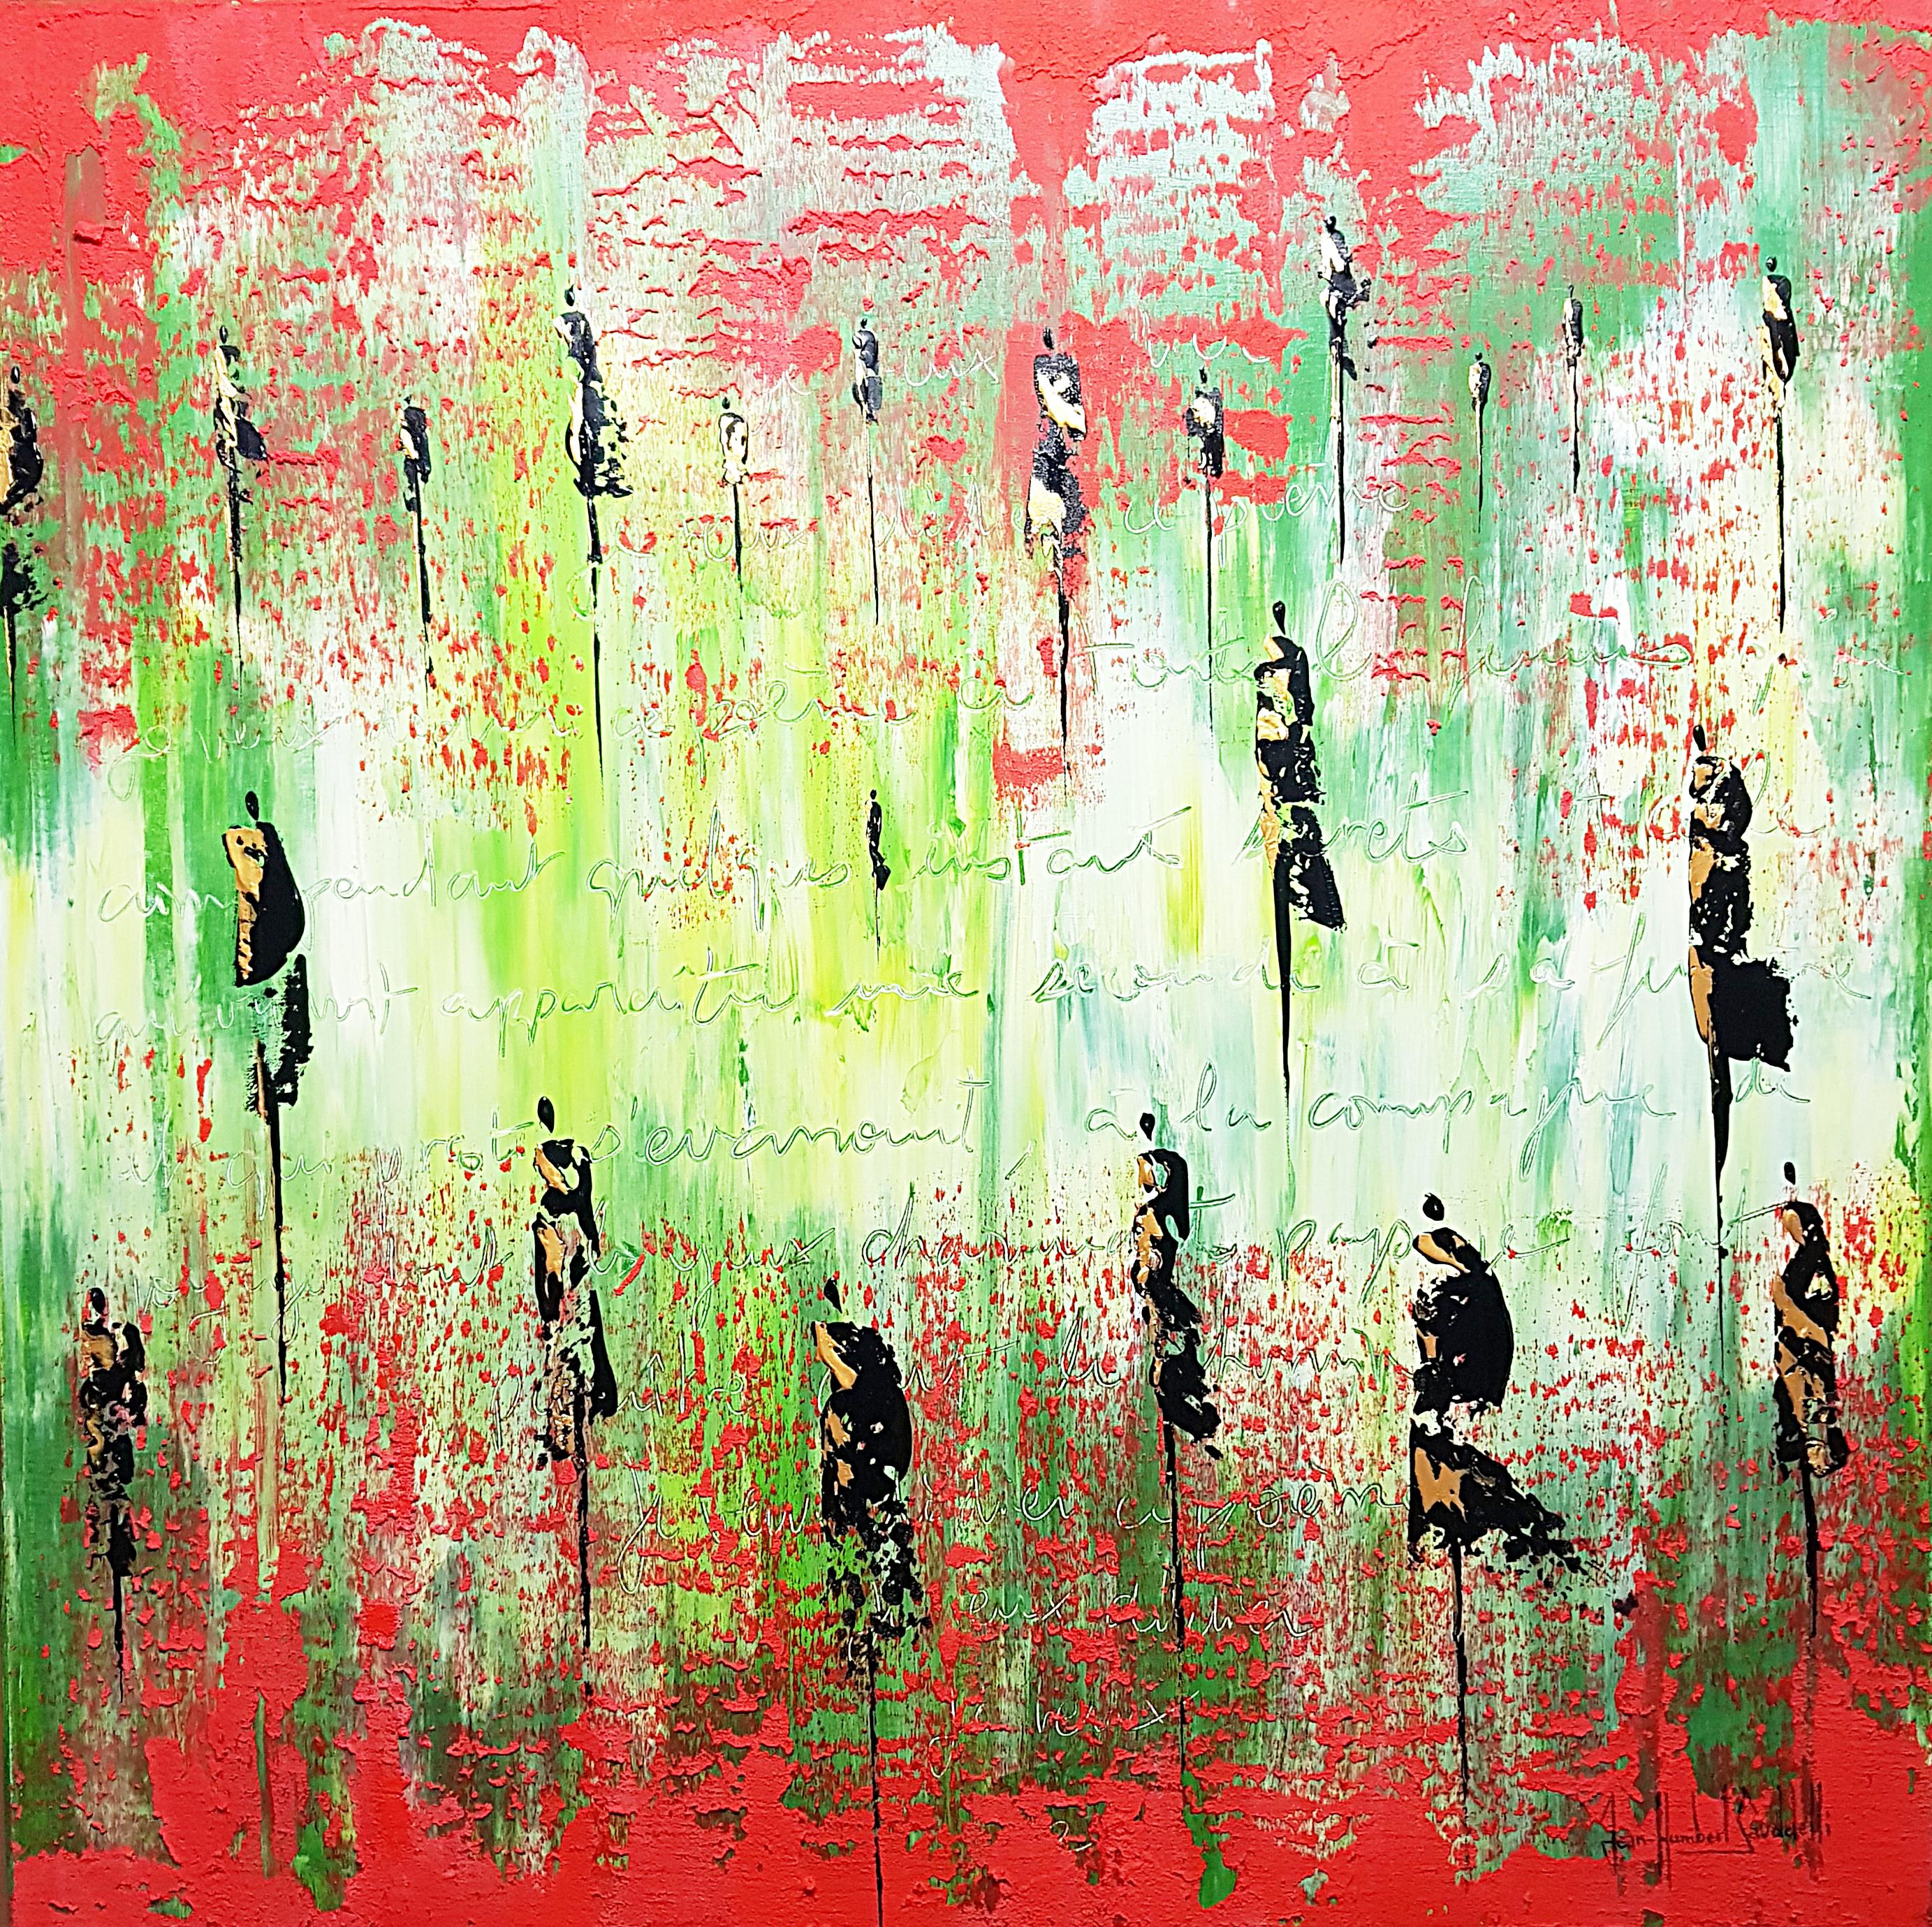 Jean-Humbert Savoldelli Landscape Painting - "The Poem", Red and Green with Text and People Abstract Acrylic Landscape